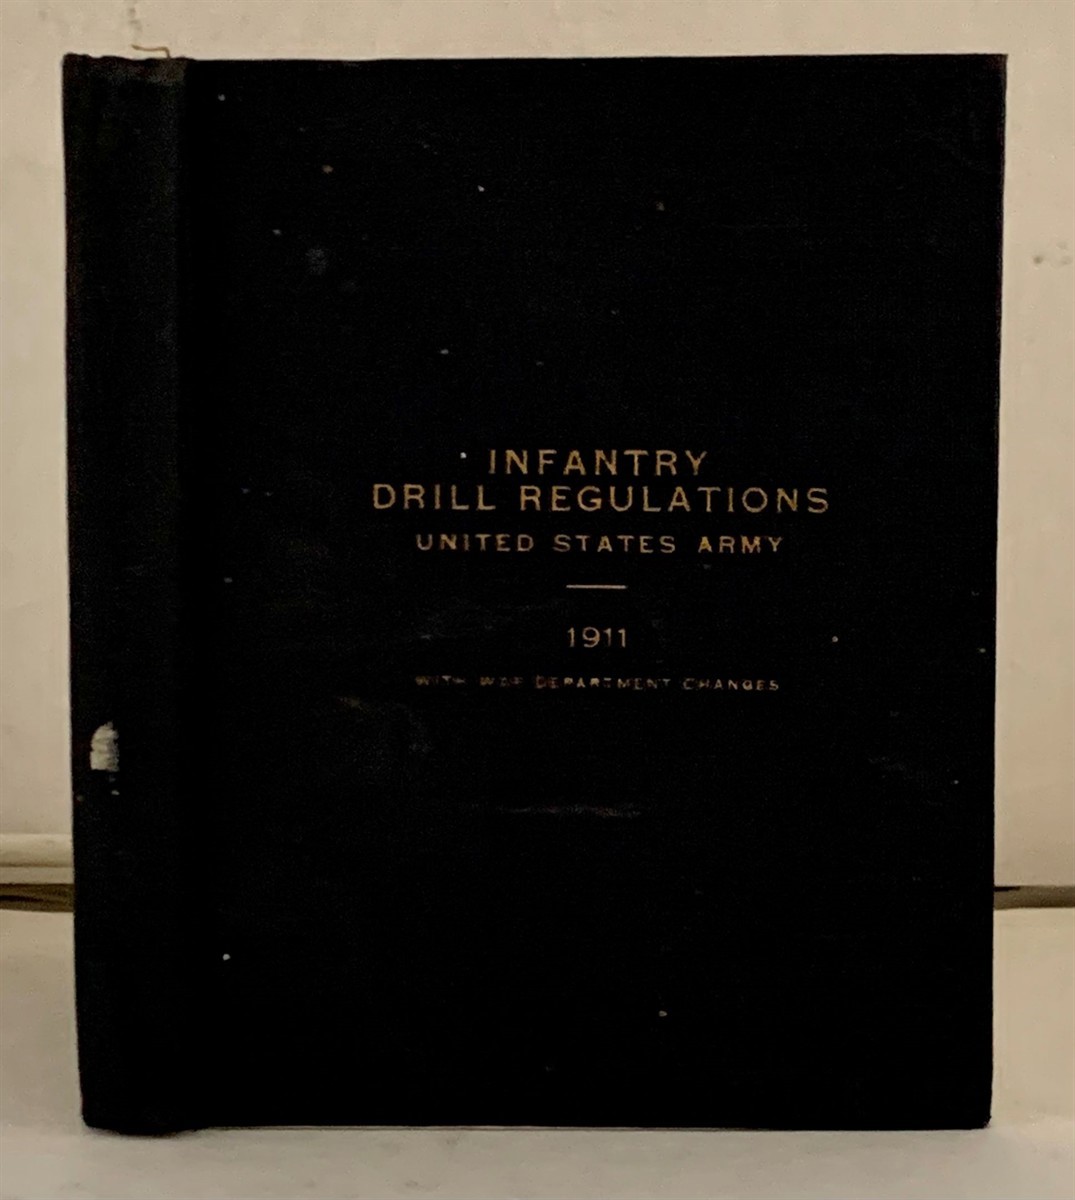 UNITED STATES ARMY - Infantry Drill Regulations United States Army 1911 with War Department Changes